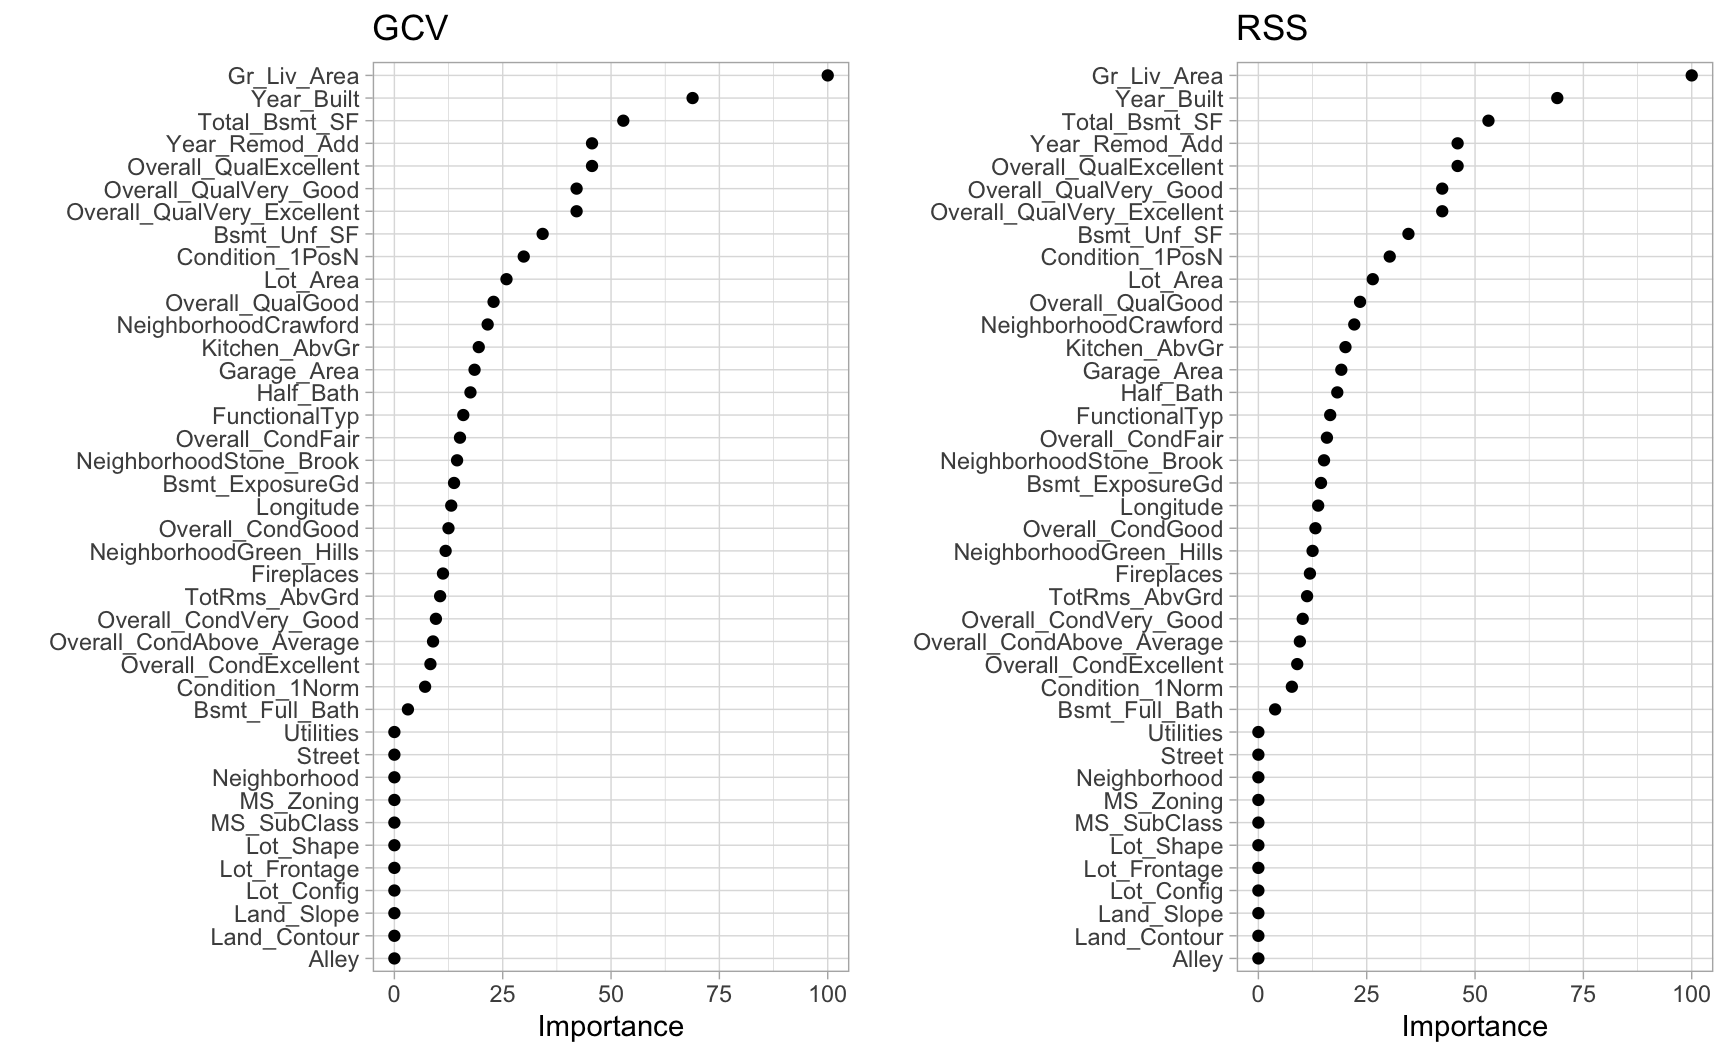 Variable importance based on impact to GCV (left) and RSS (right) values as predictors are added to the model. Both variable importance measures will usually give you very similar results.